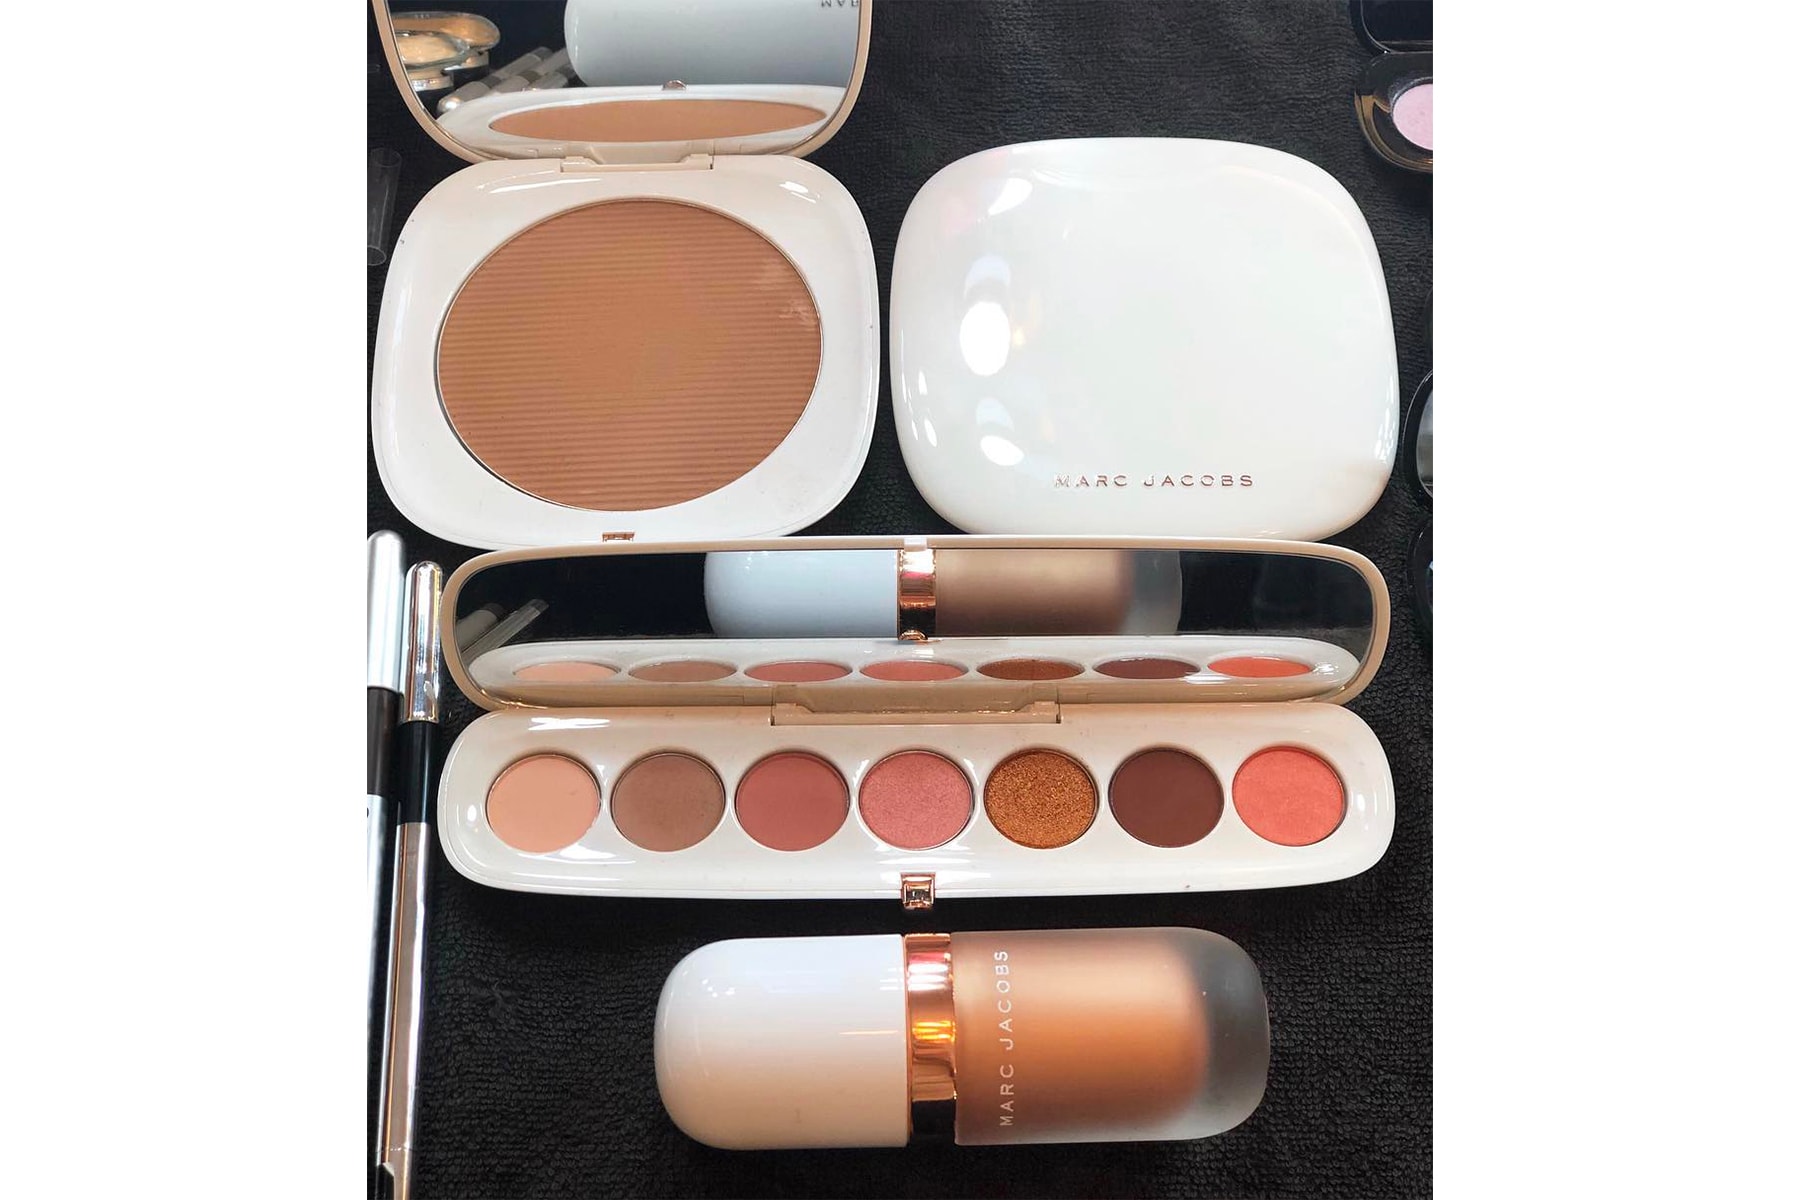 Marc Jacobs Beauty Coconut Collection Rose Gold Gel Dew Drops Highlighter Eyeshadow Palette Setting Powder Bronzer Release Date Sephora April 24 Price Eyeconic